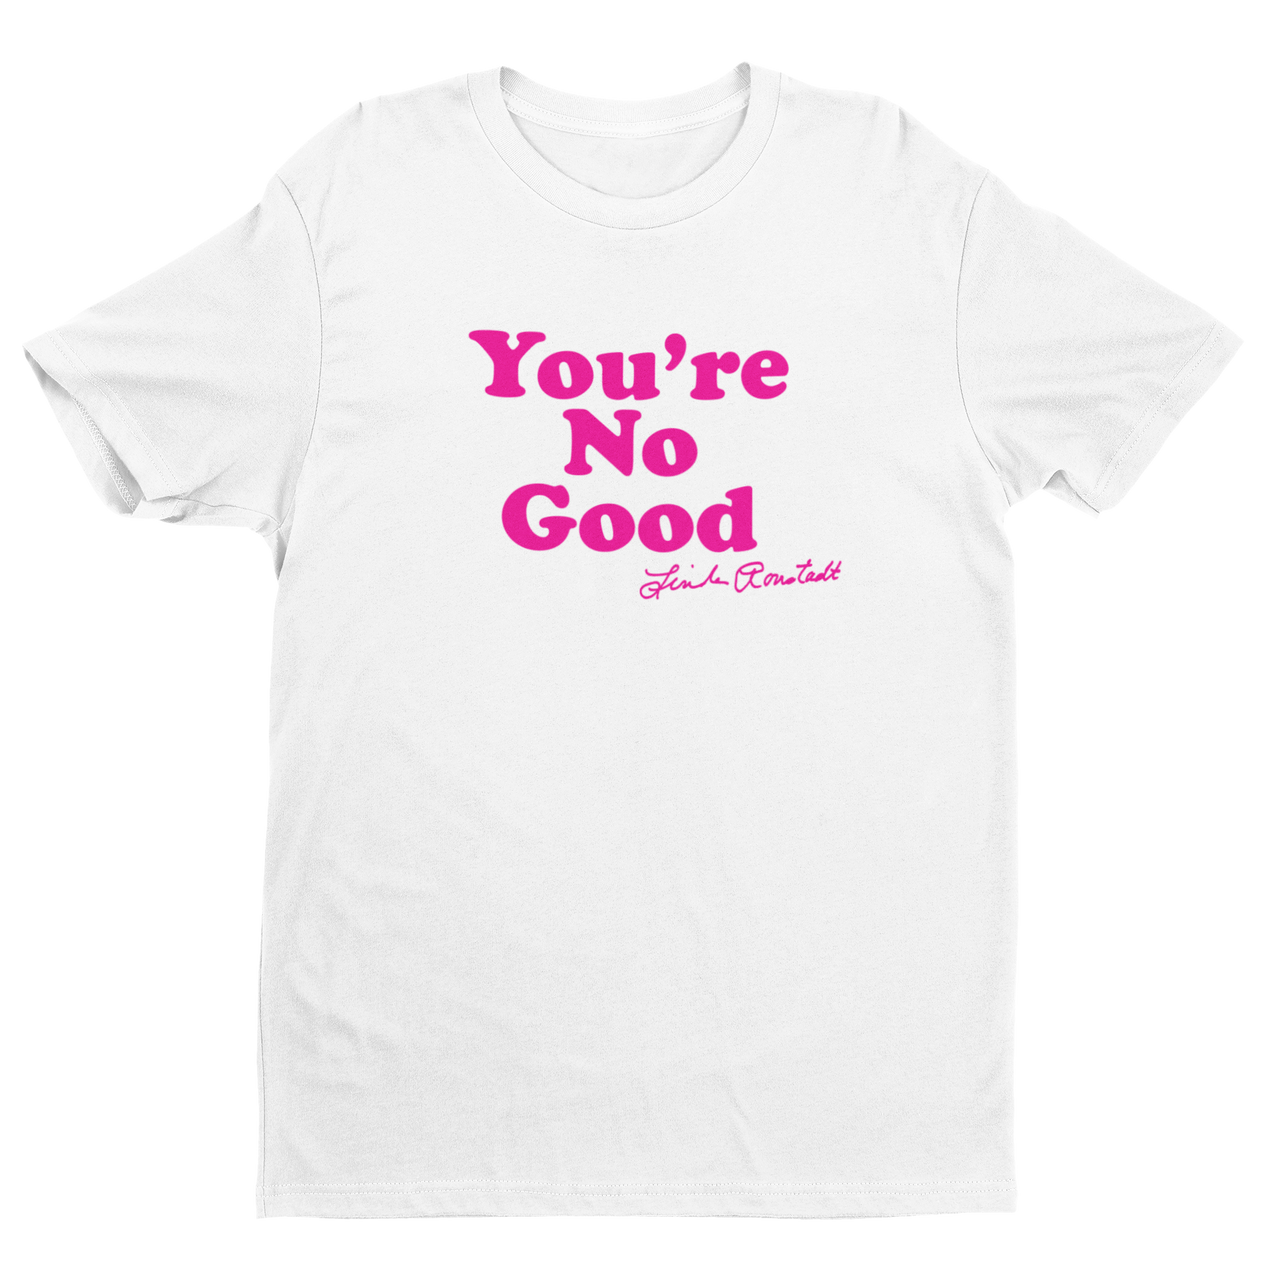 "You're No Good" Tee- White/Hot Pink